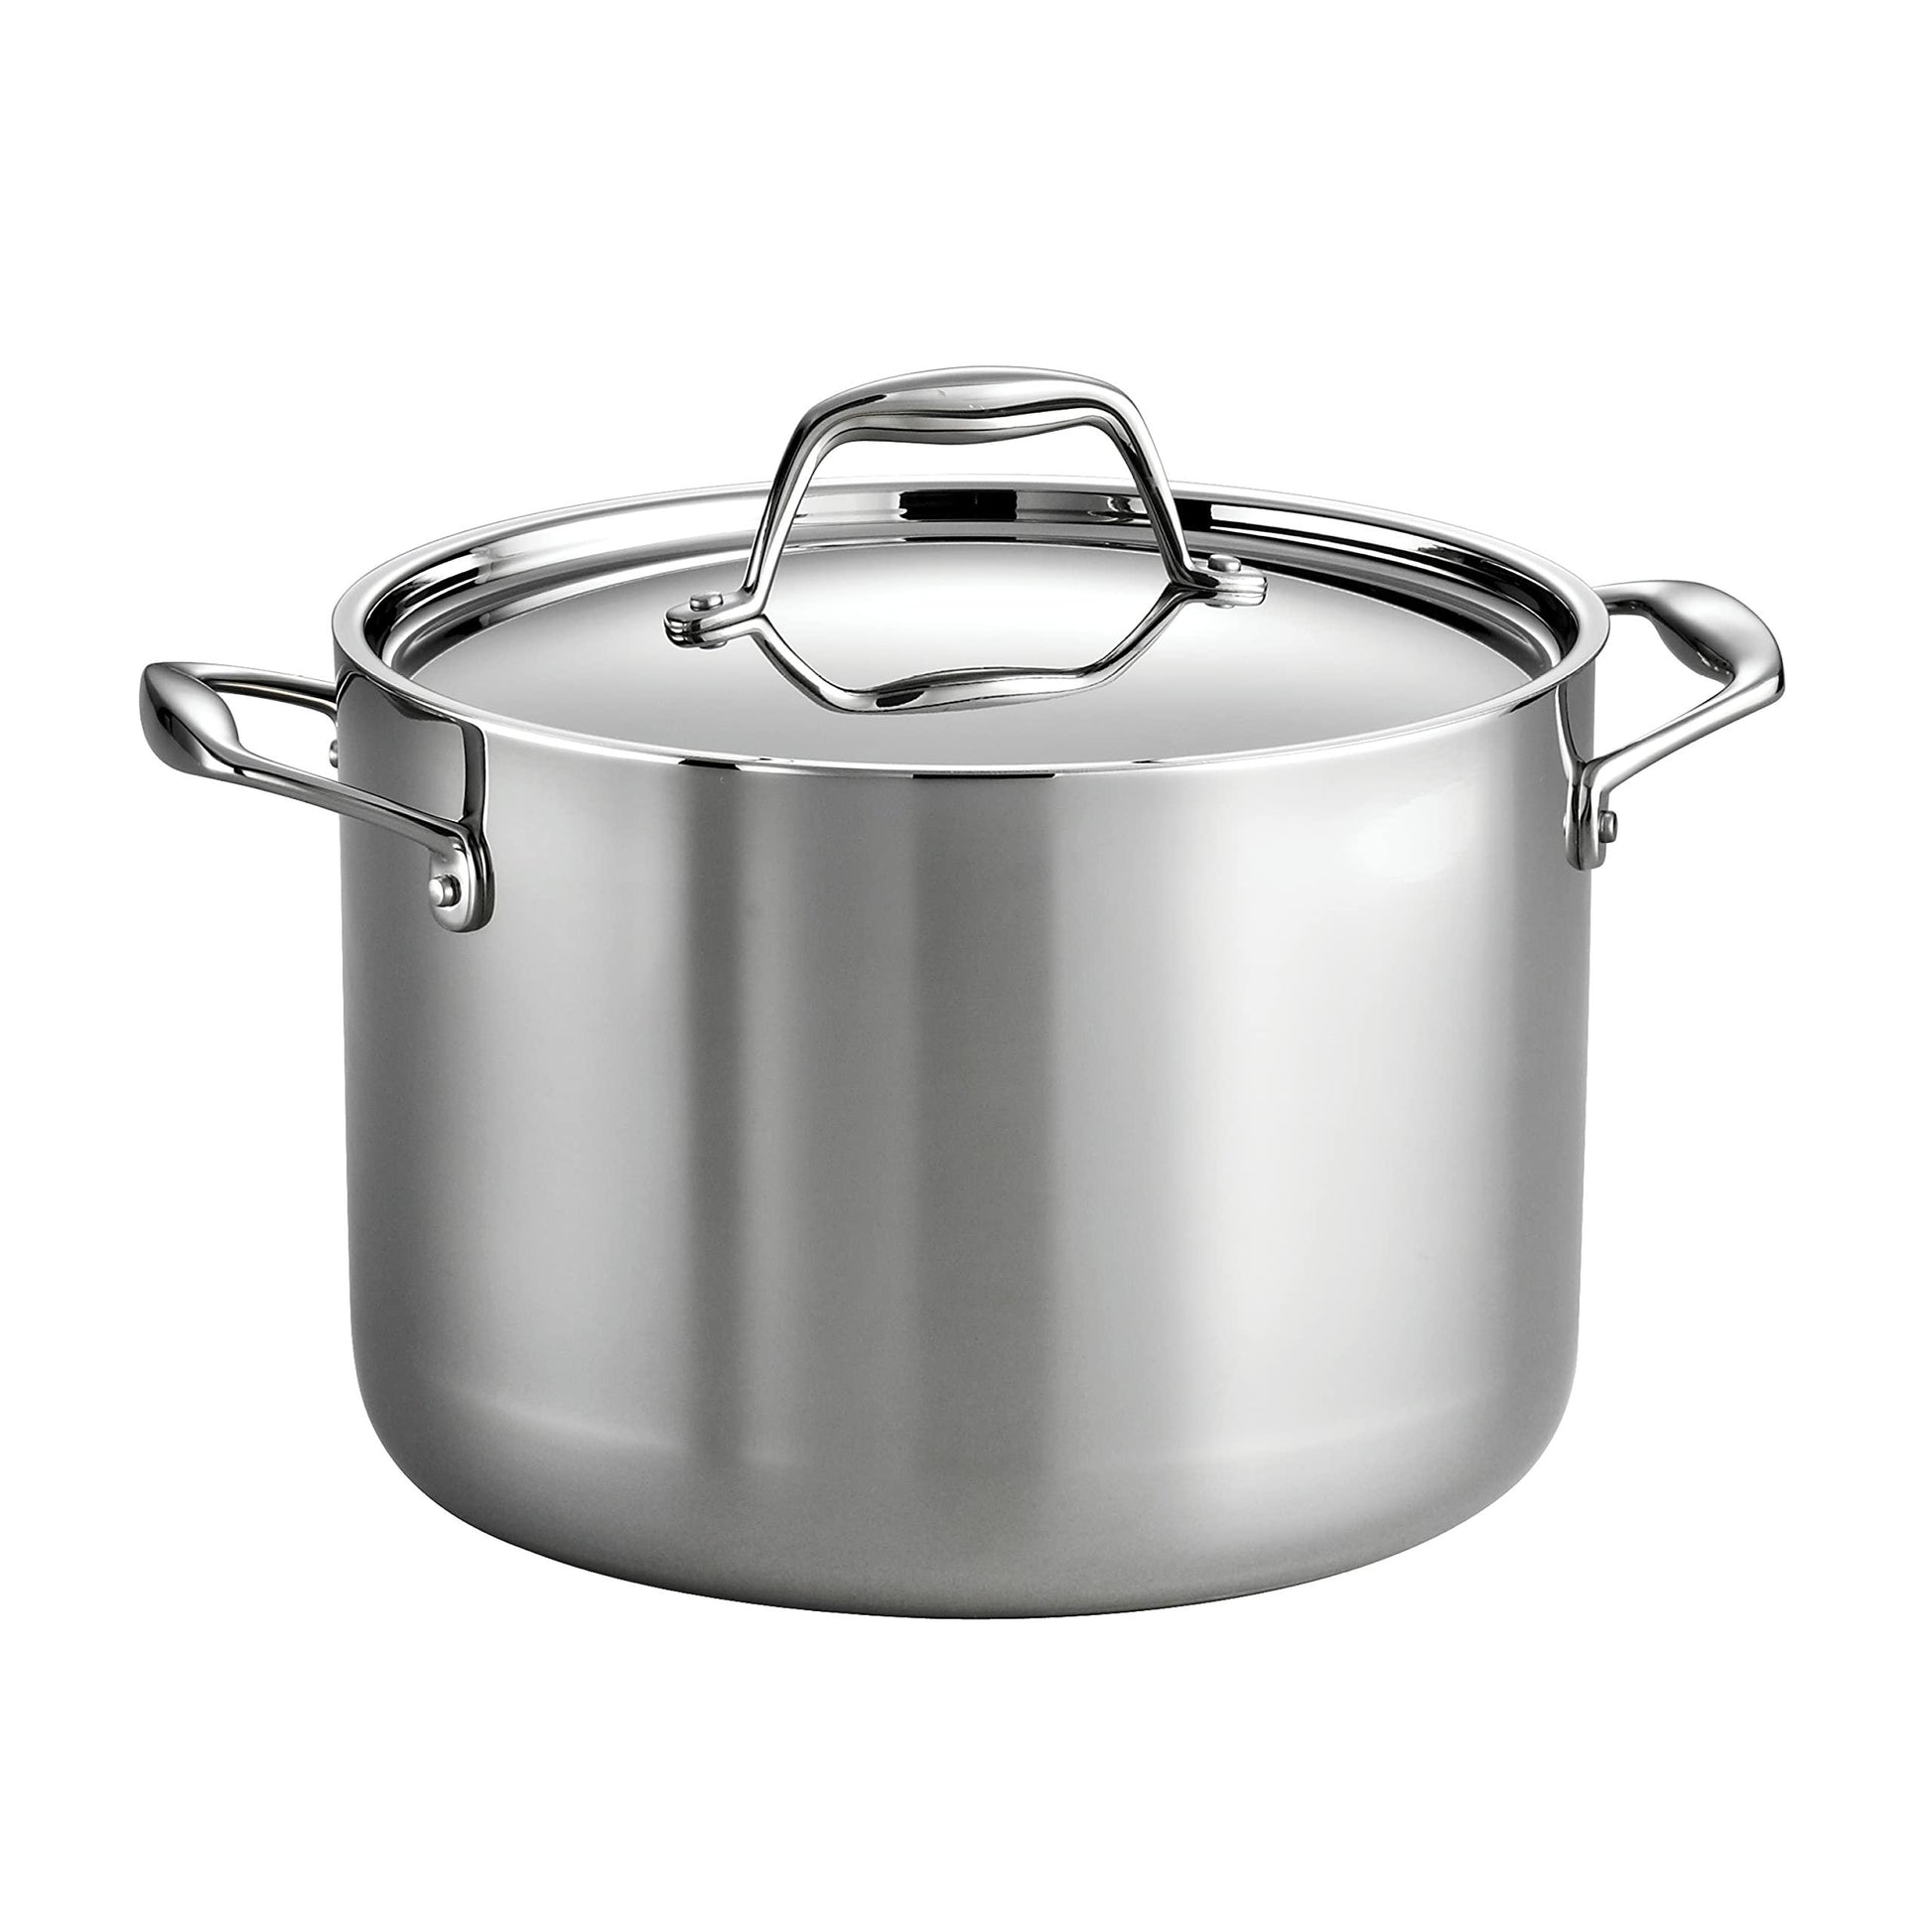 Tramontina Covered Stock Pot Stainless Steel Induction-Ready Tri-Ply Clad 8 Quart, 80116/041DS - CookCave